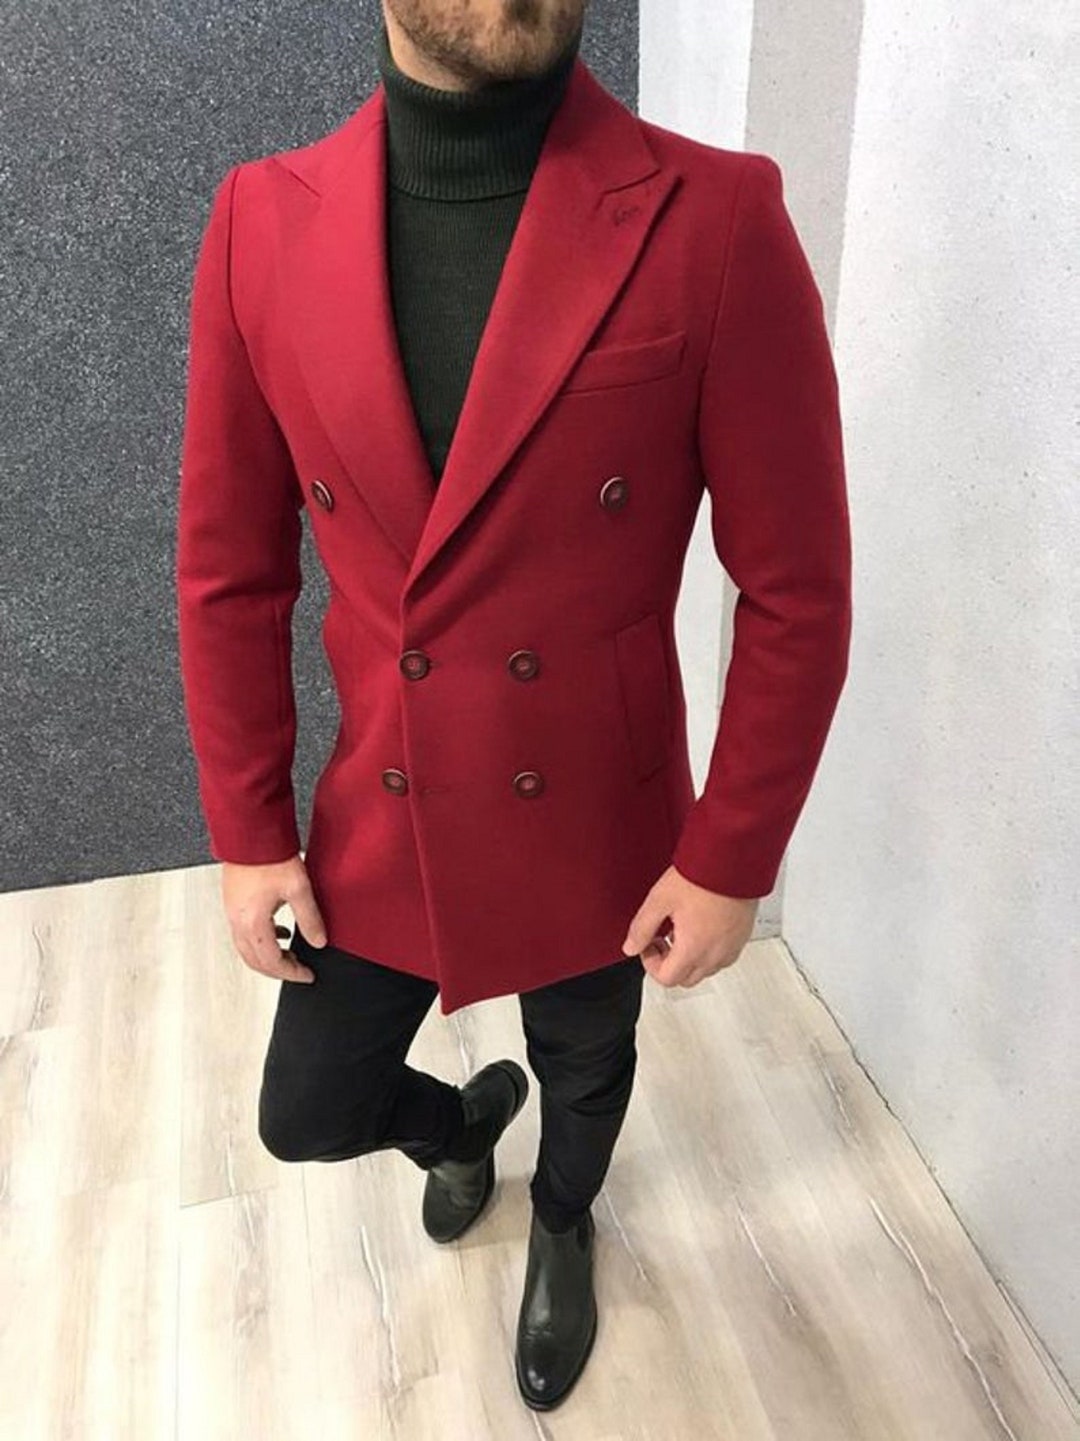 Men's Winter Double Breasted Fashion Party Wear Jacket - Etsy